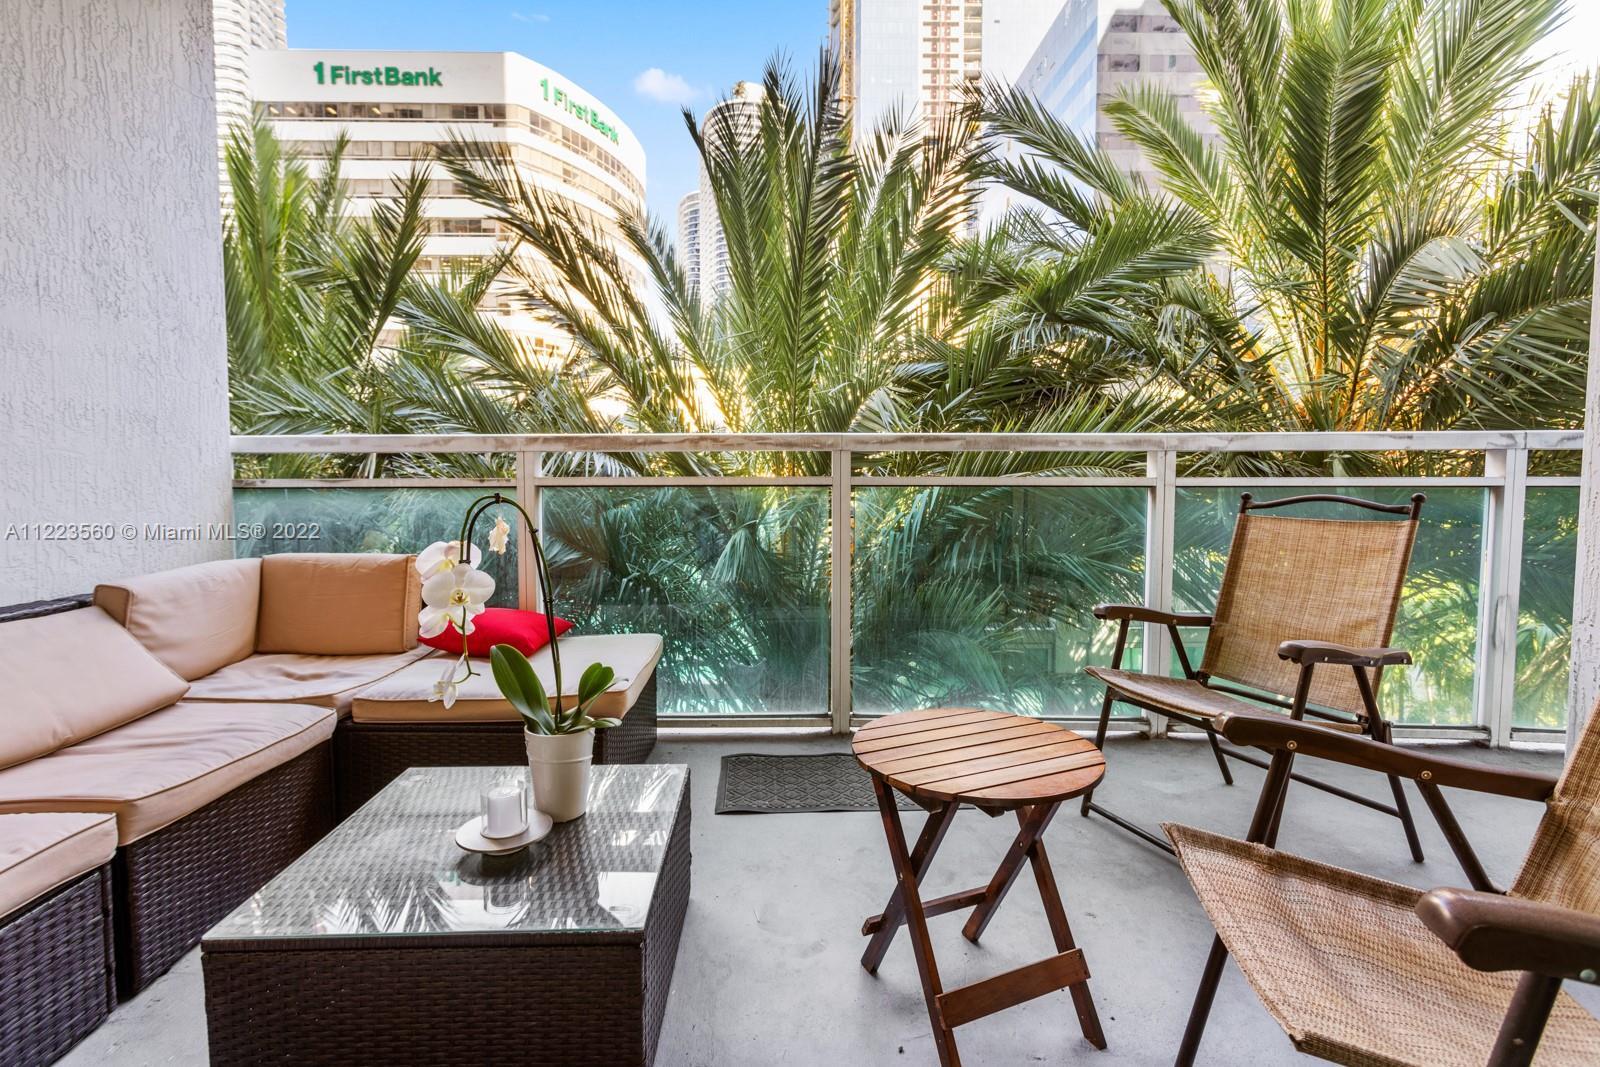 FANTASTIC 1 BED 1 BATH IN BRICKELL PLAZA CONDOMINIUM.  WOOD FLOORS, IMPECCABLE OPEN KITCHEN WITH STA